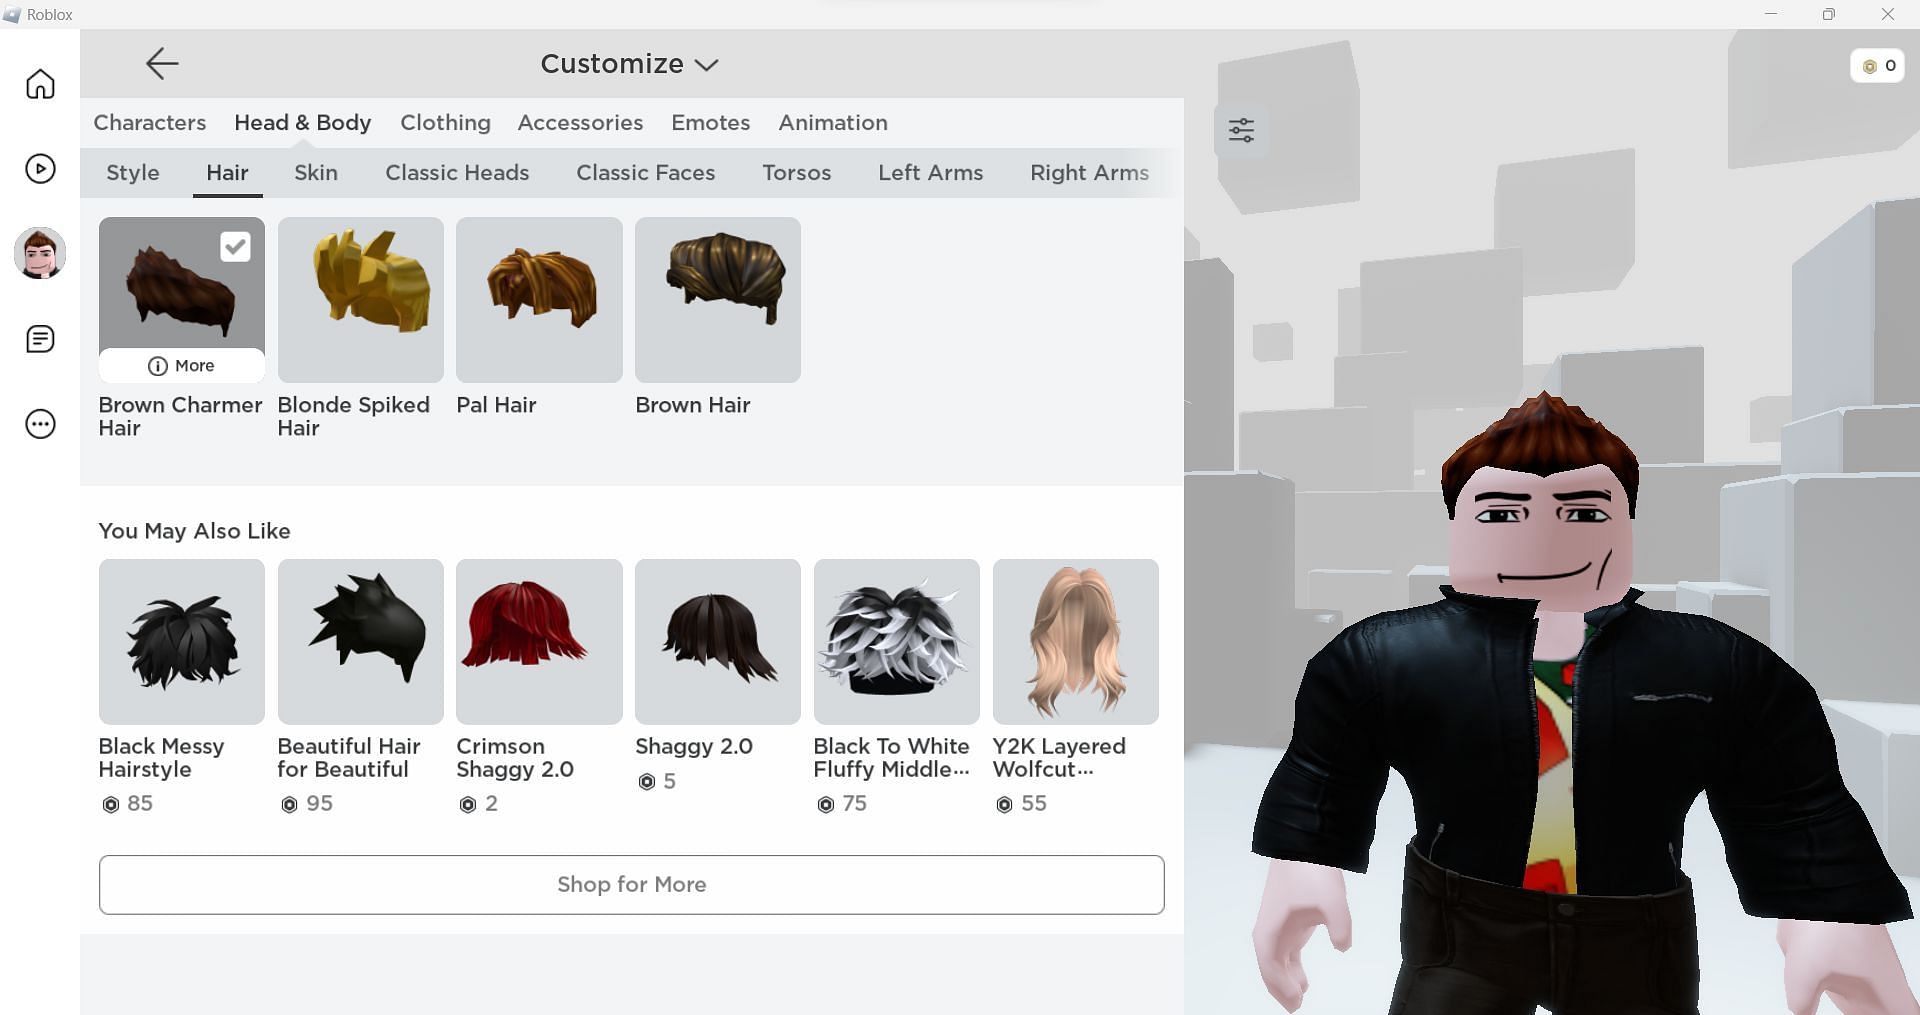 IEagle on X: To get a cool Photo to your avatar in Roblox like